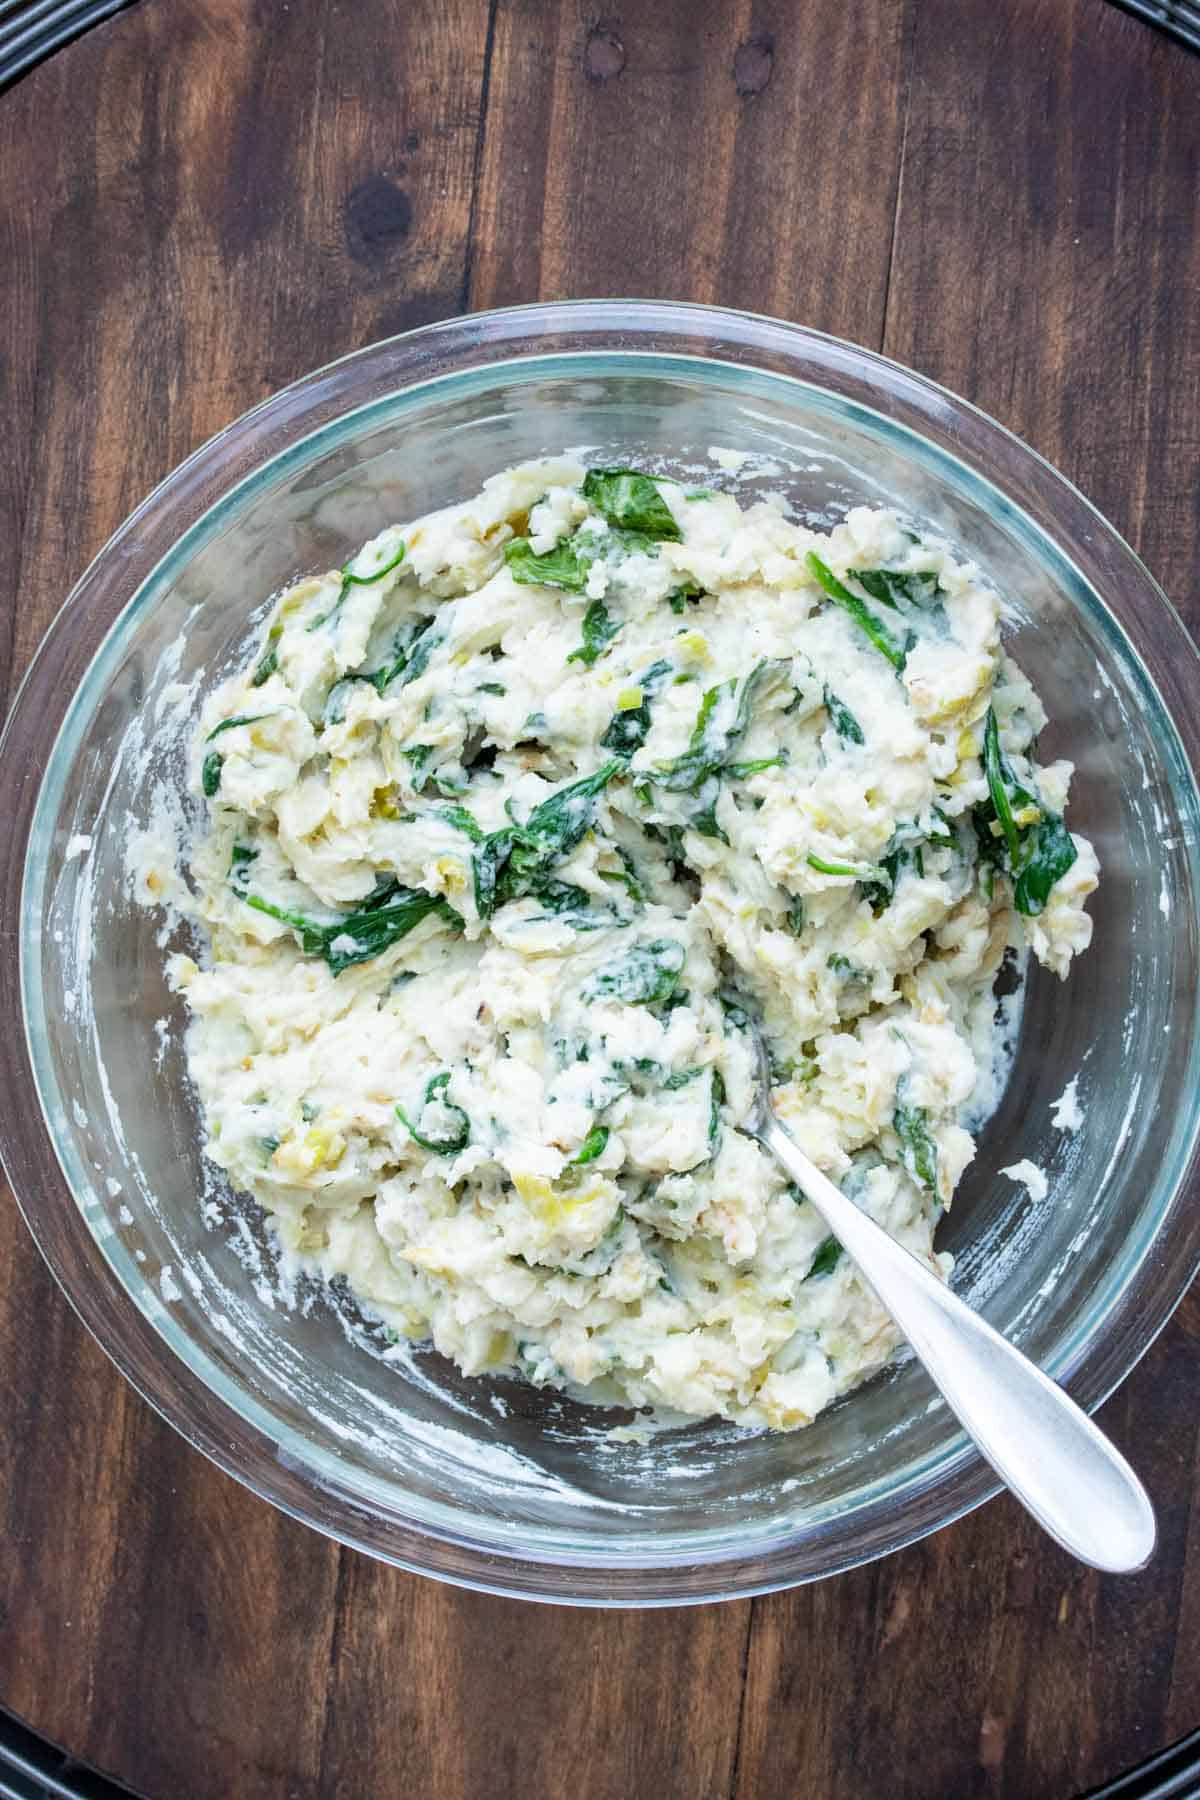 Glass bowl filled with mashed potatoes and sauteed greens mixed together